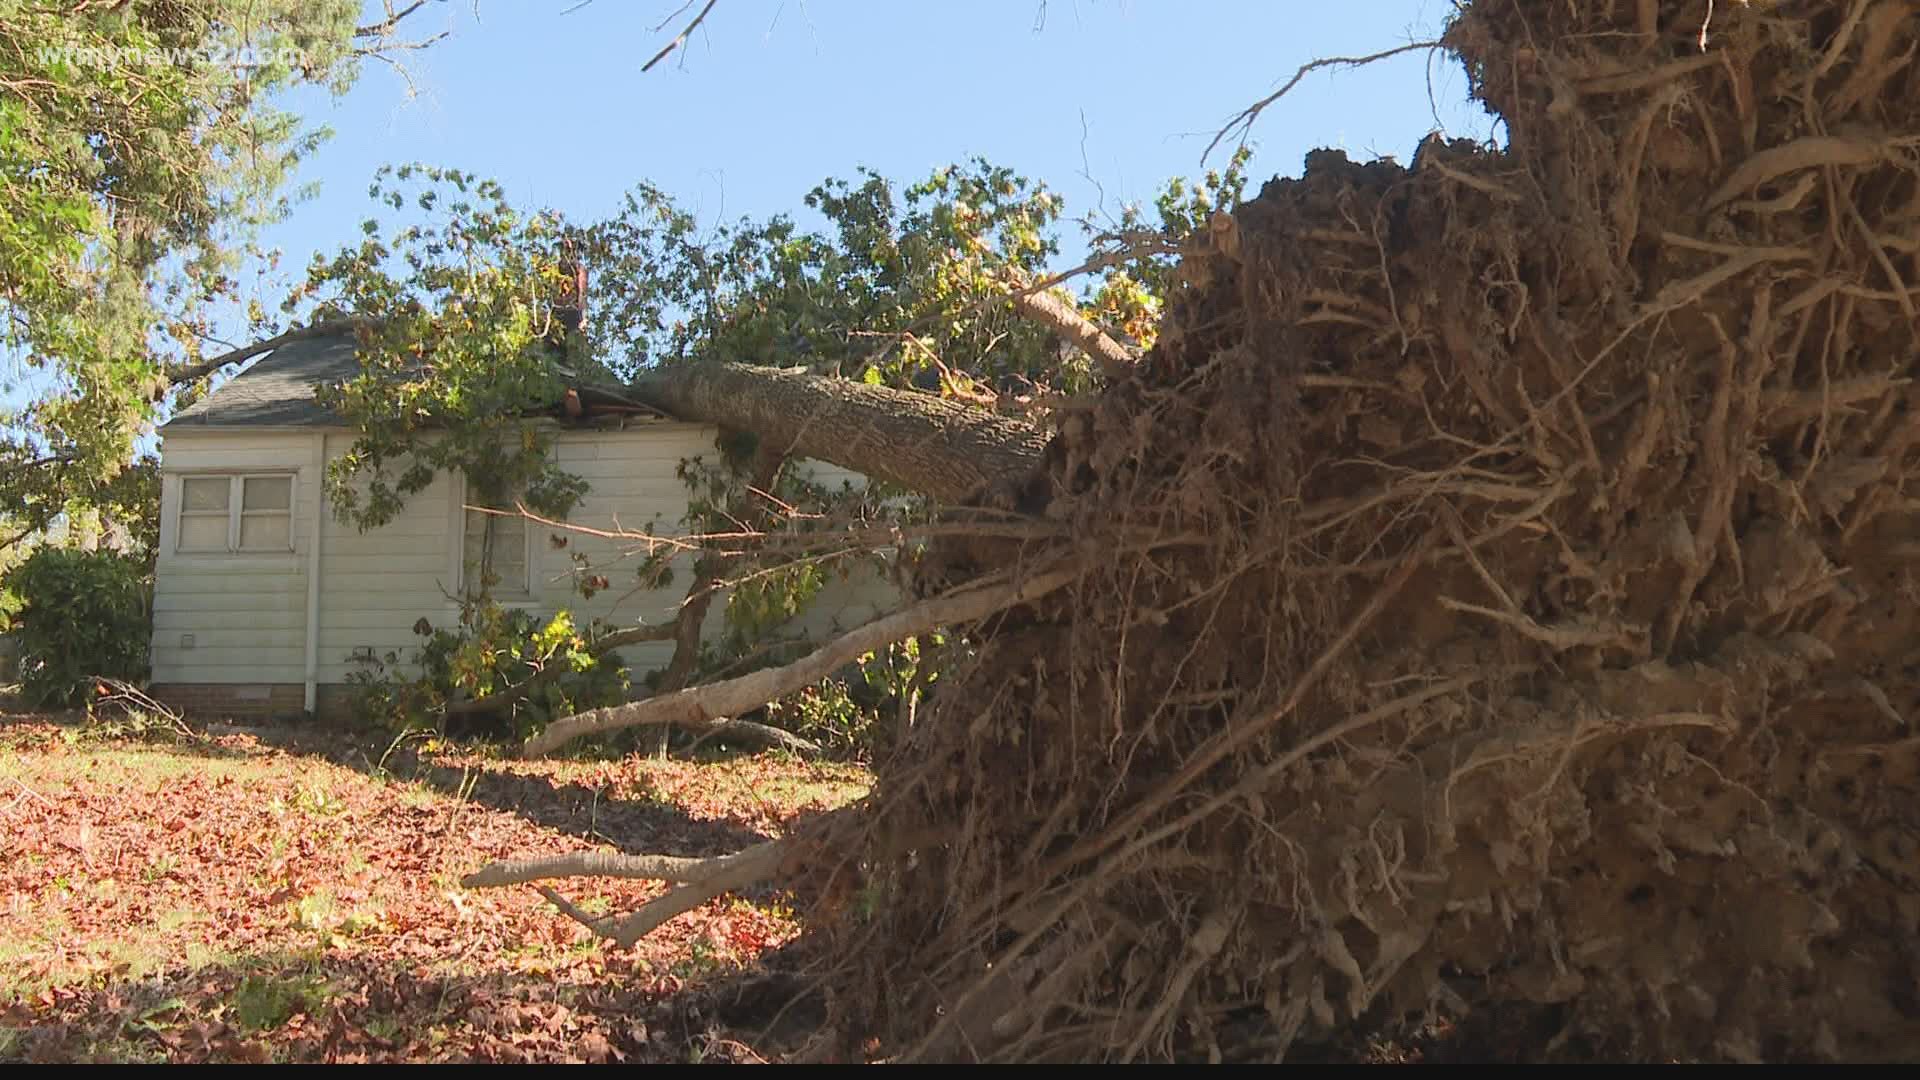 Nicholas Smith was asleep when the tree came crashing through the roof during yesterday's storms.